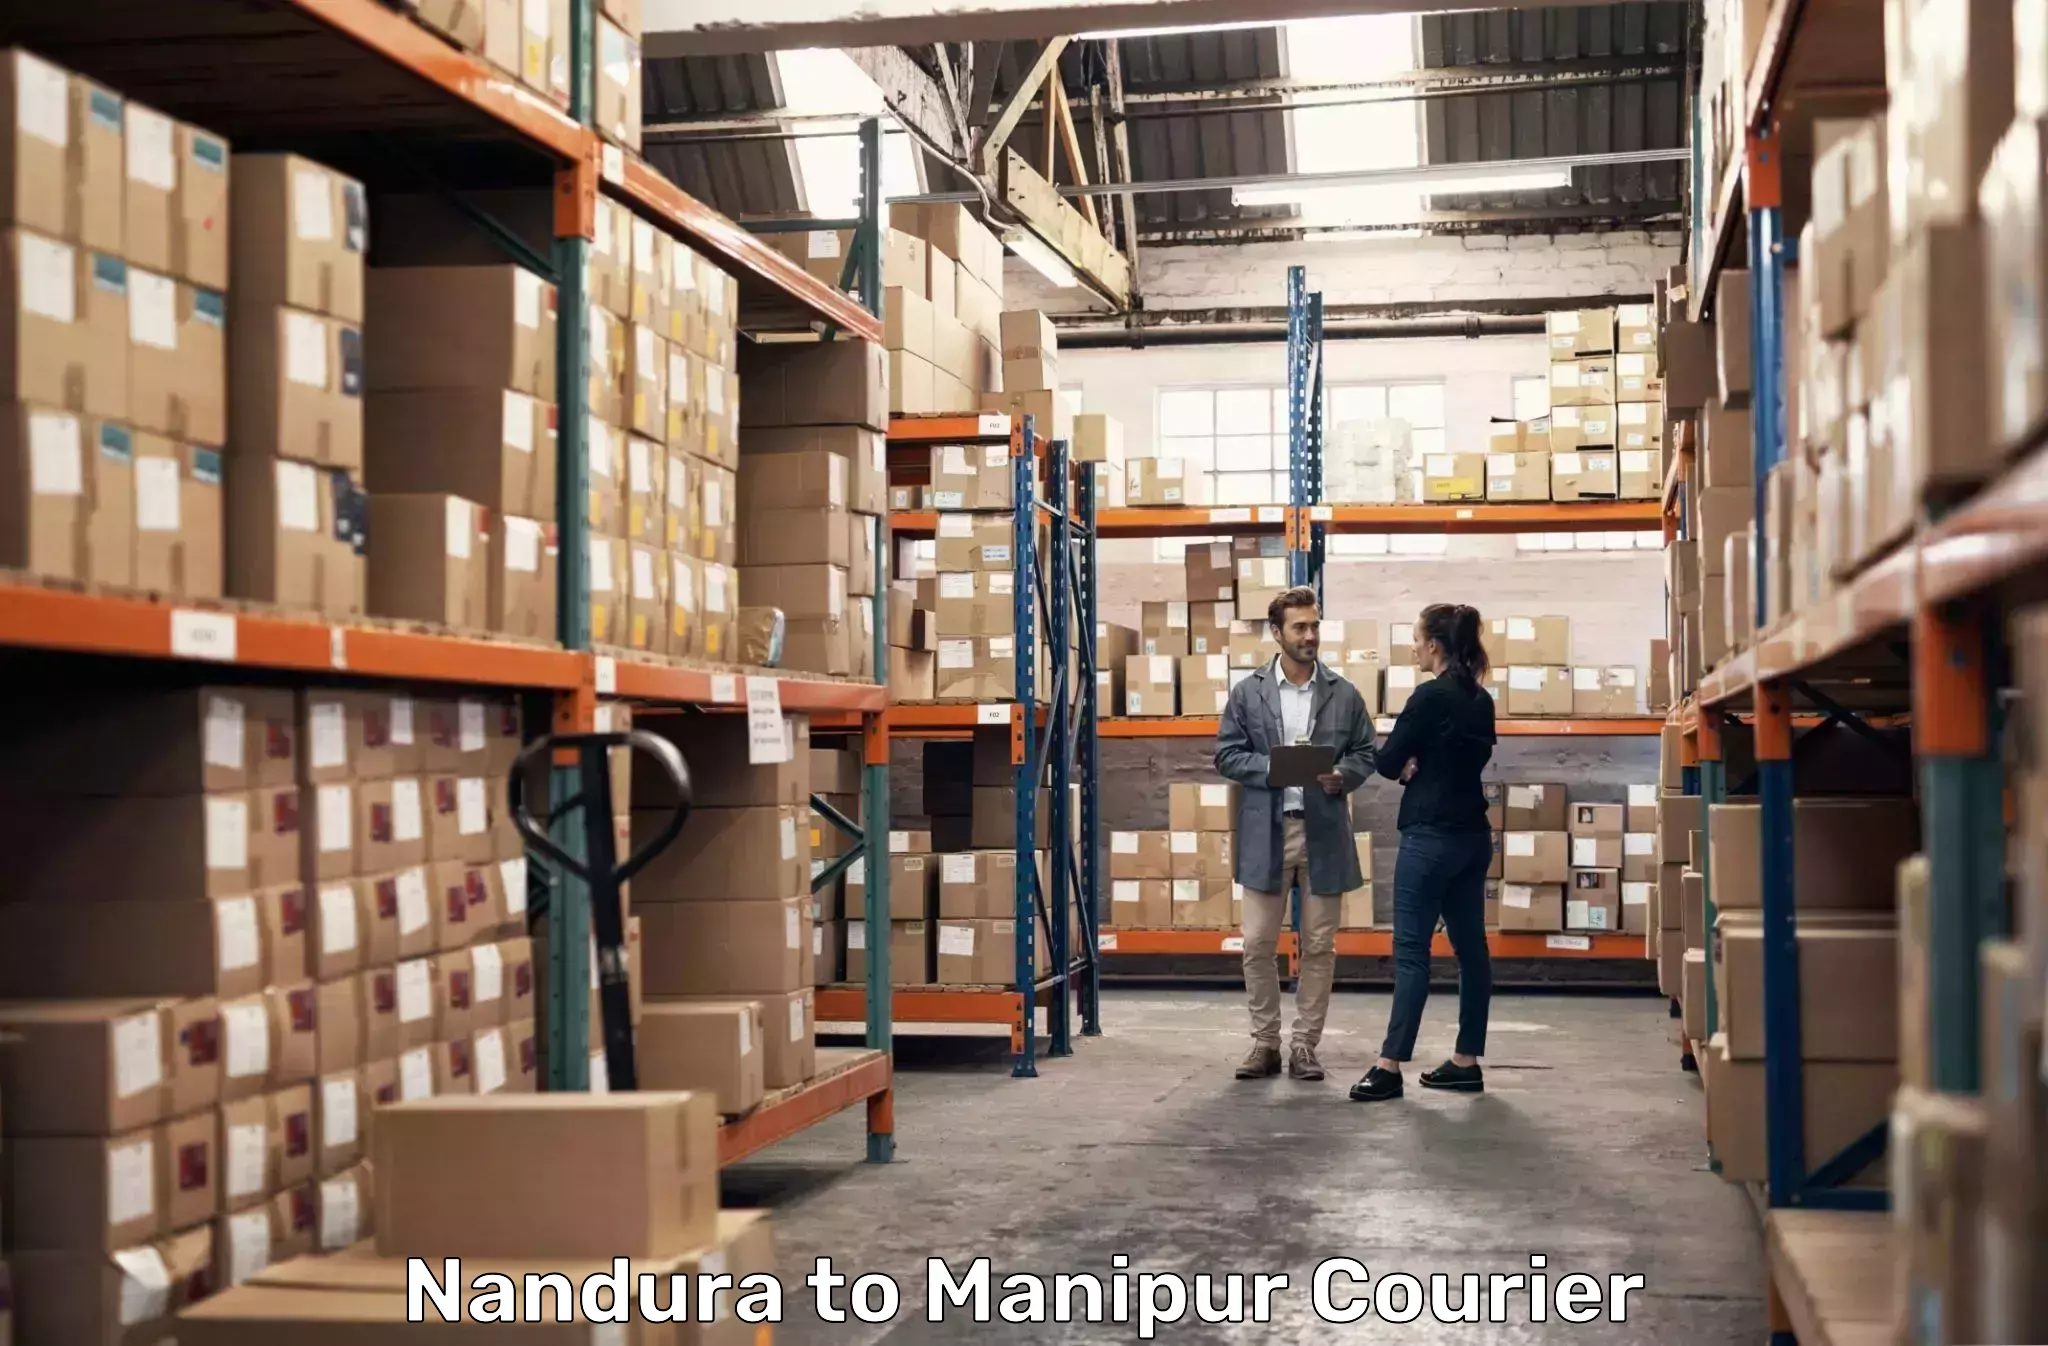 Professional courier services Nandura to Manipur